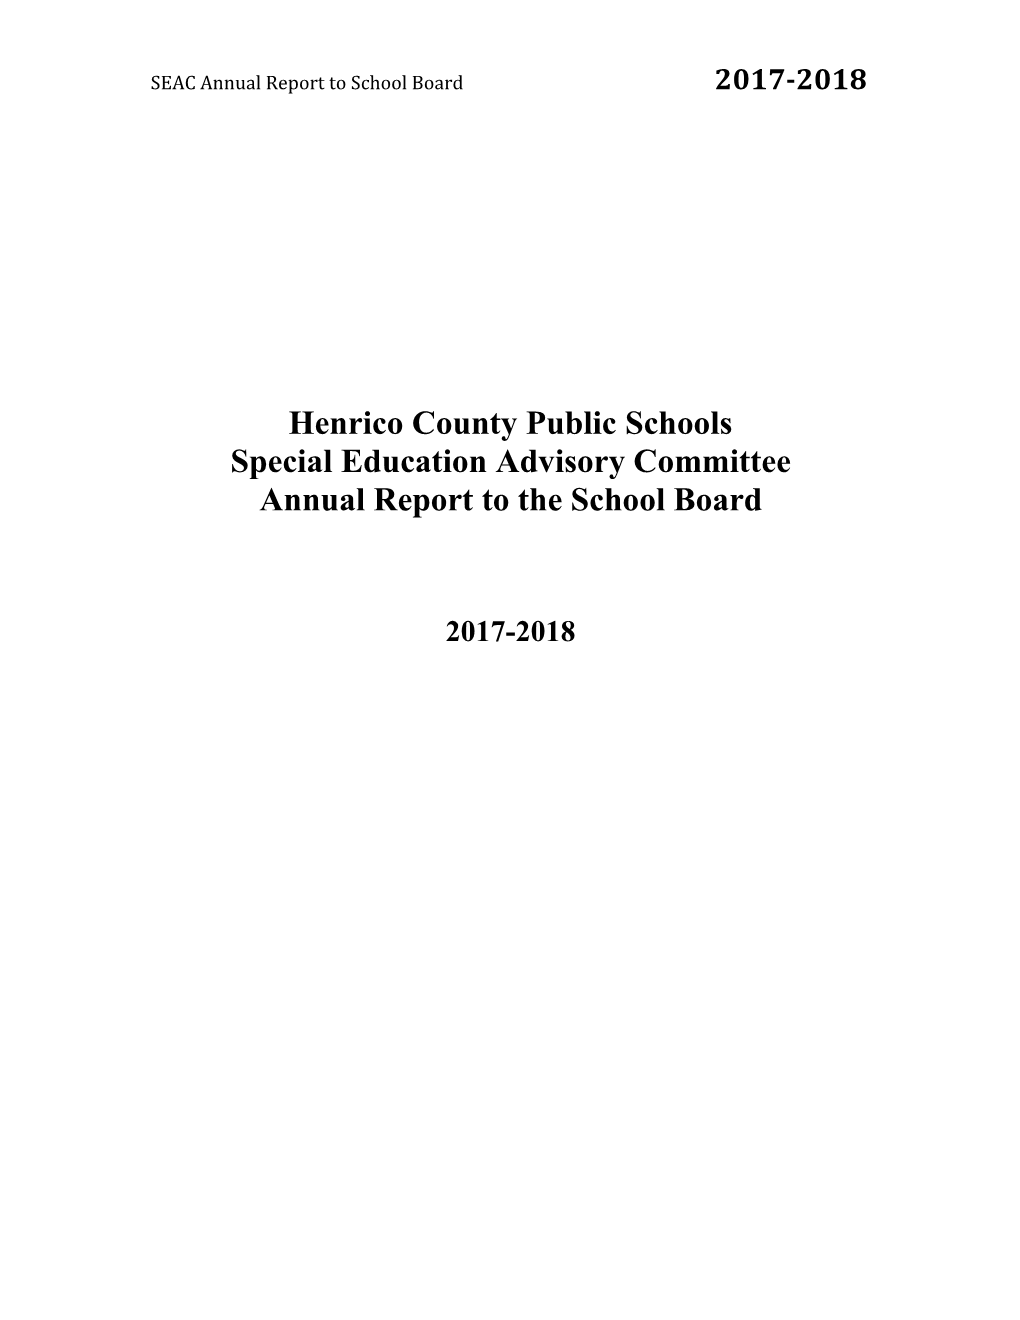 Special Education Annual Report 2017-2018